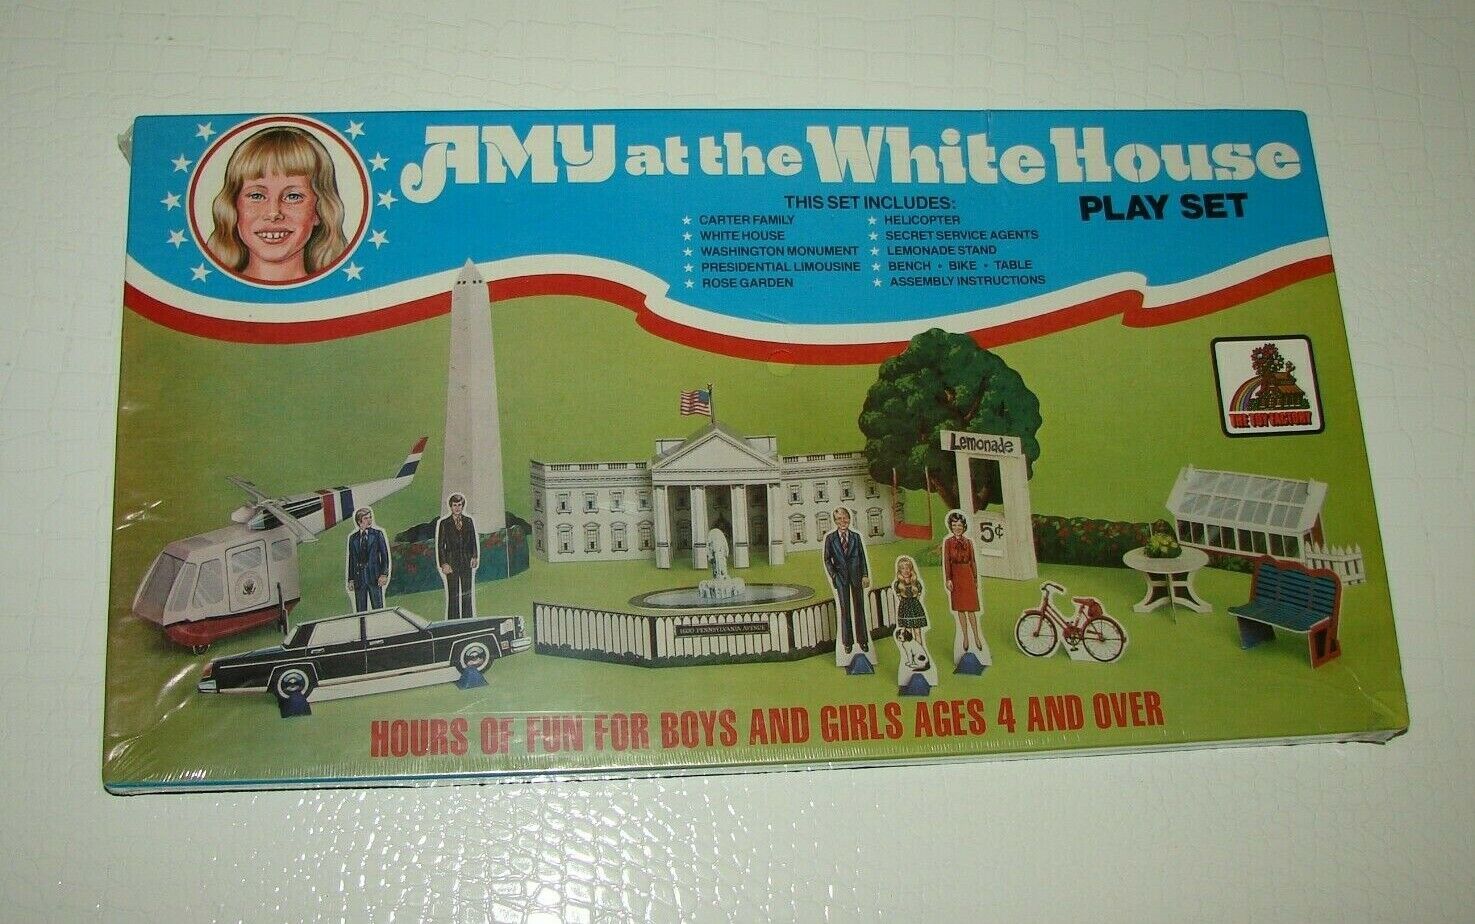 Vintage “AMY AT THE WHITE HOUSE” JIMMY CARTER FAMILY PLAY SET FACTORY Sealed